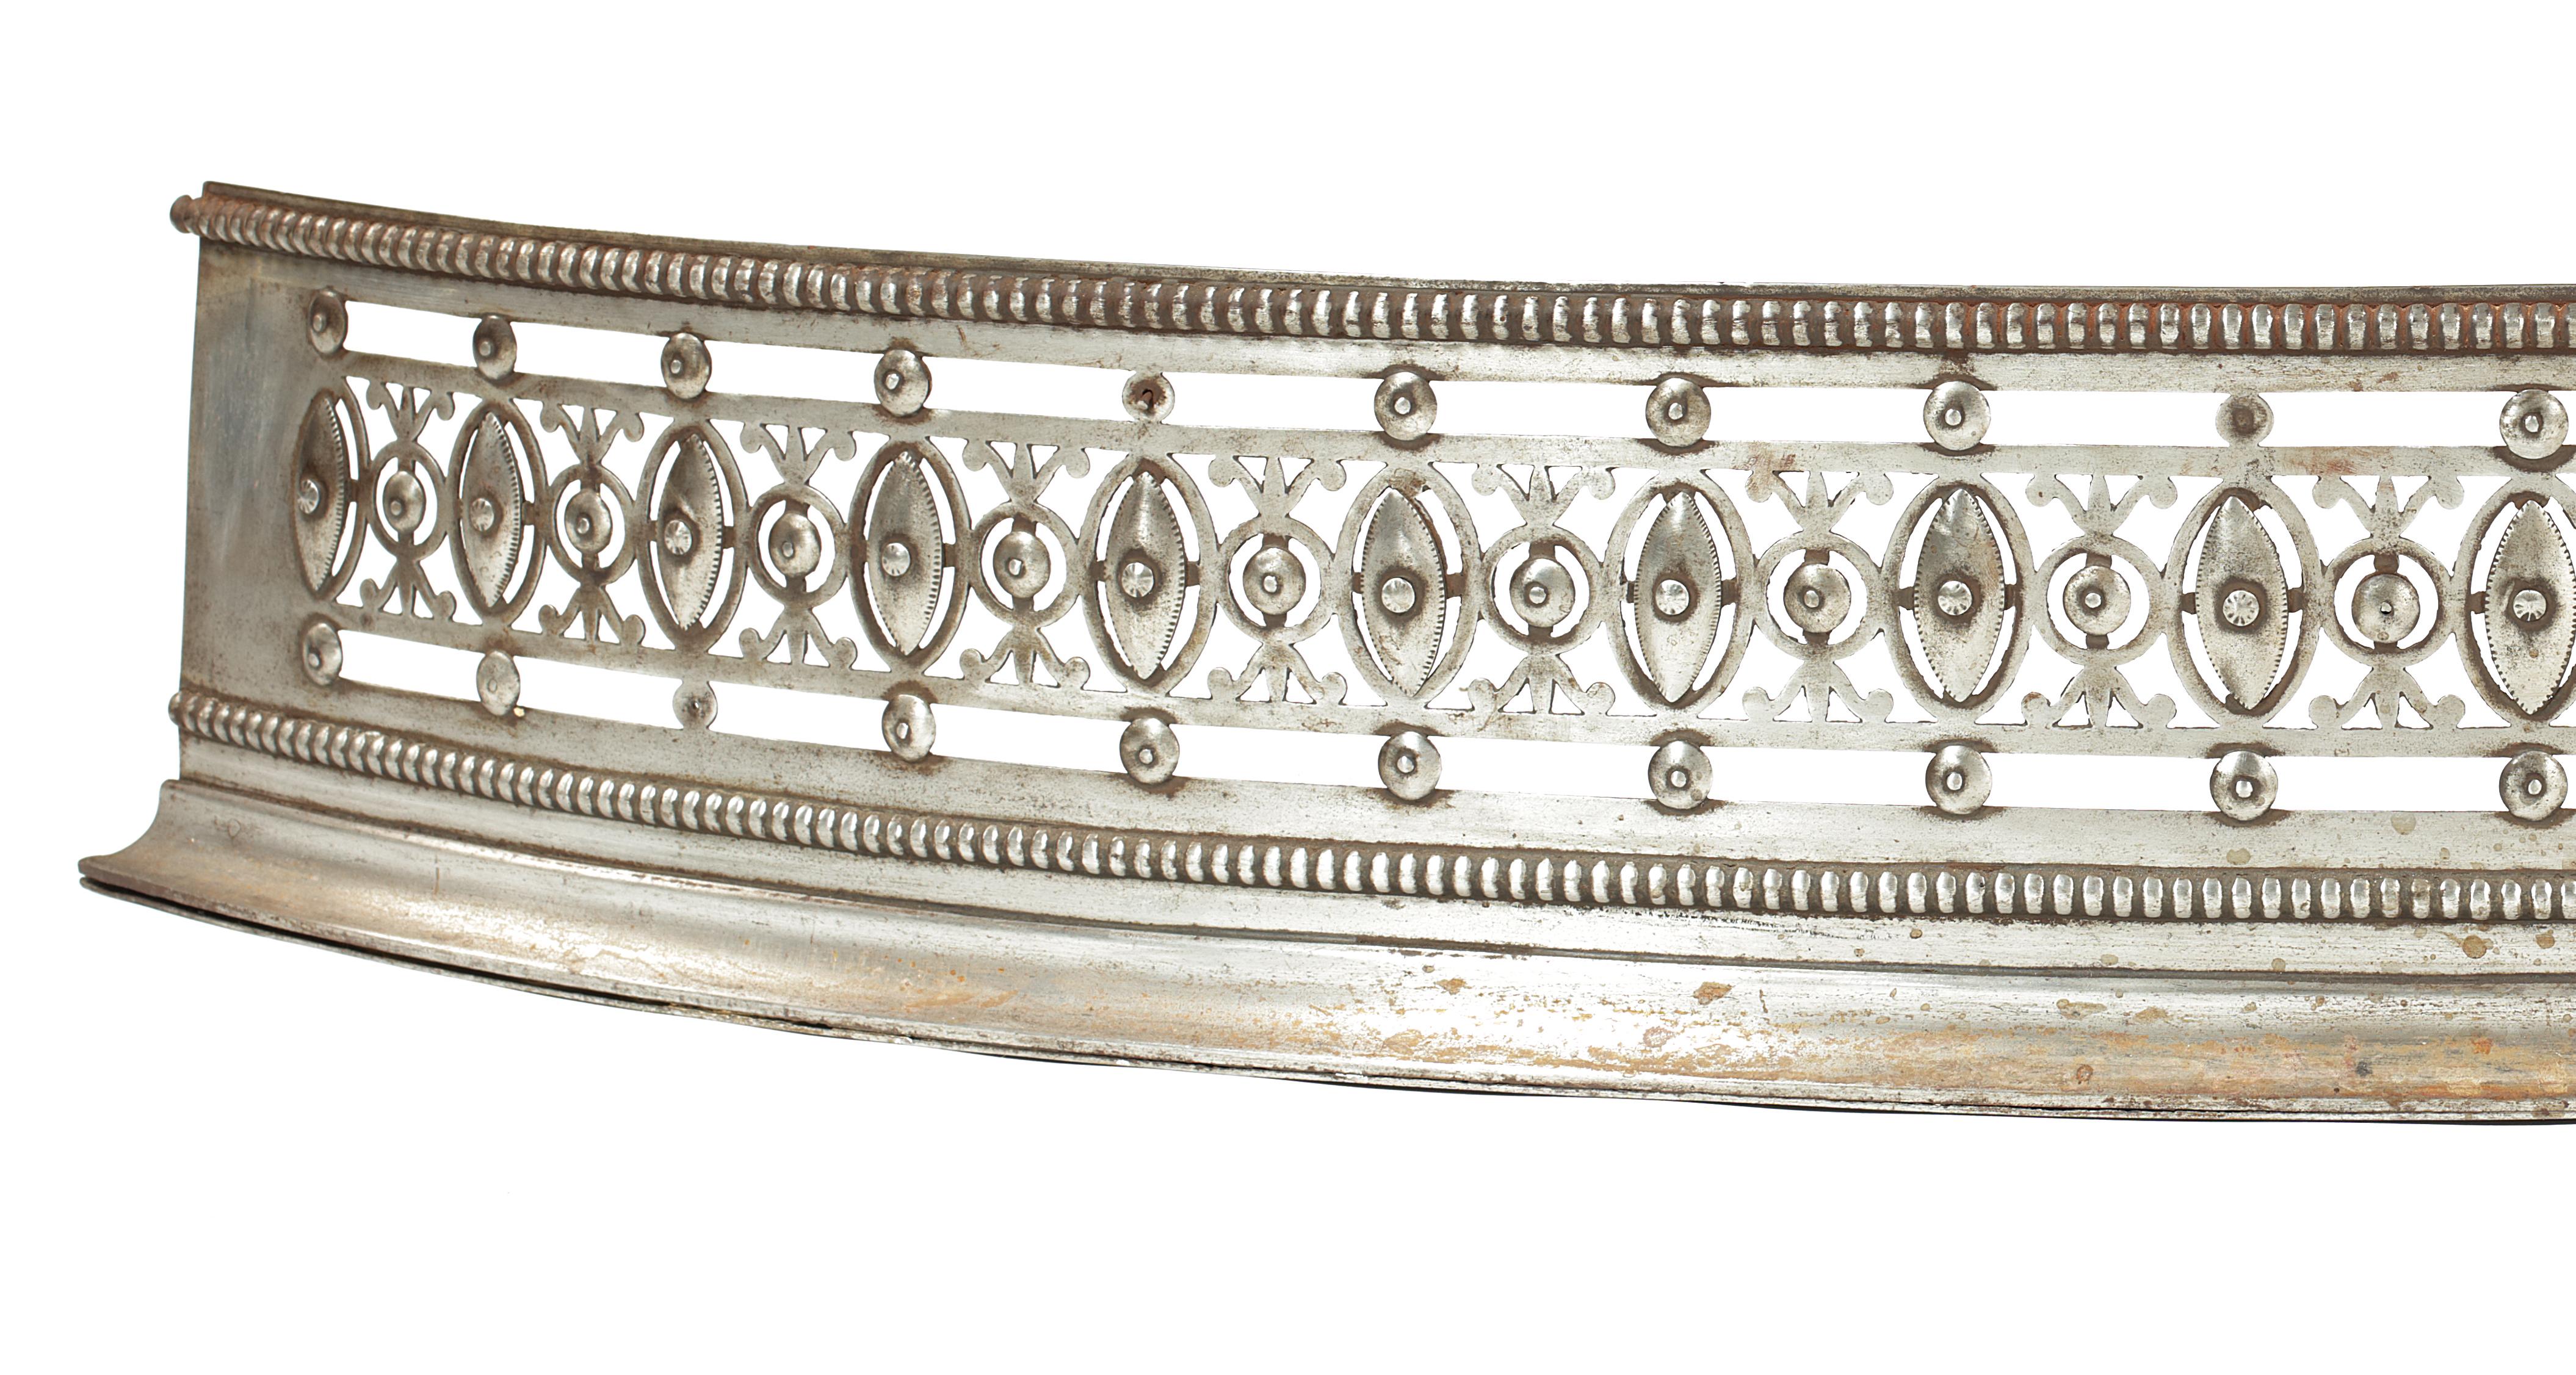 The beaded edge above a pierced leaf frieze applied with roundels and ovals, on a moulded base.